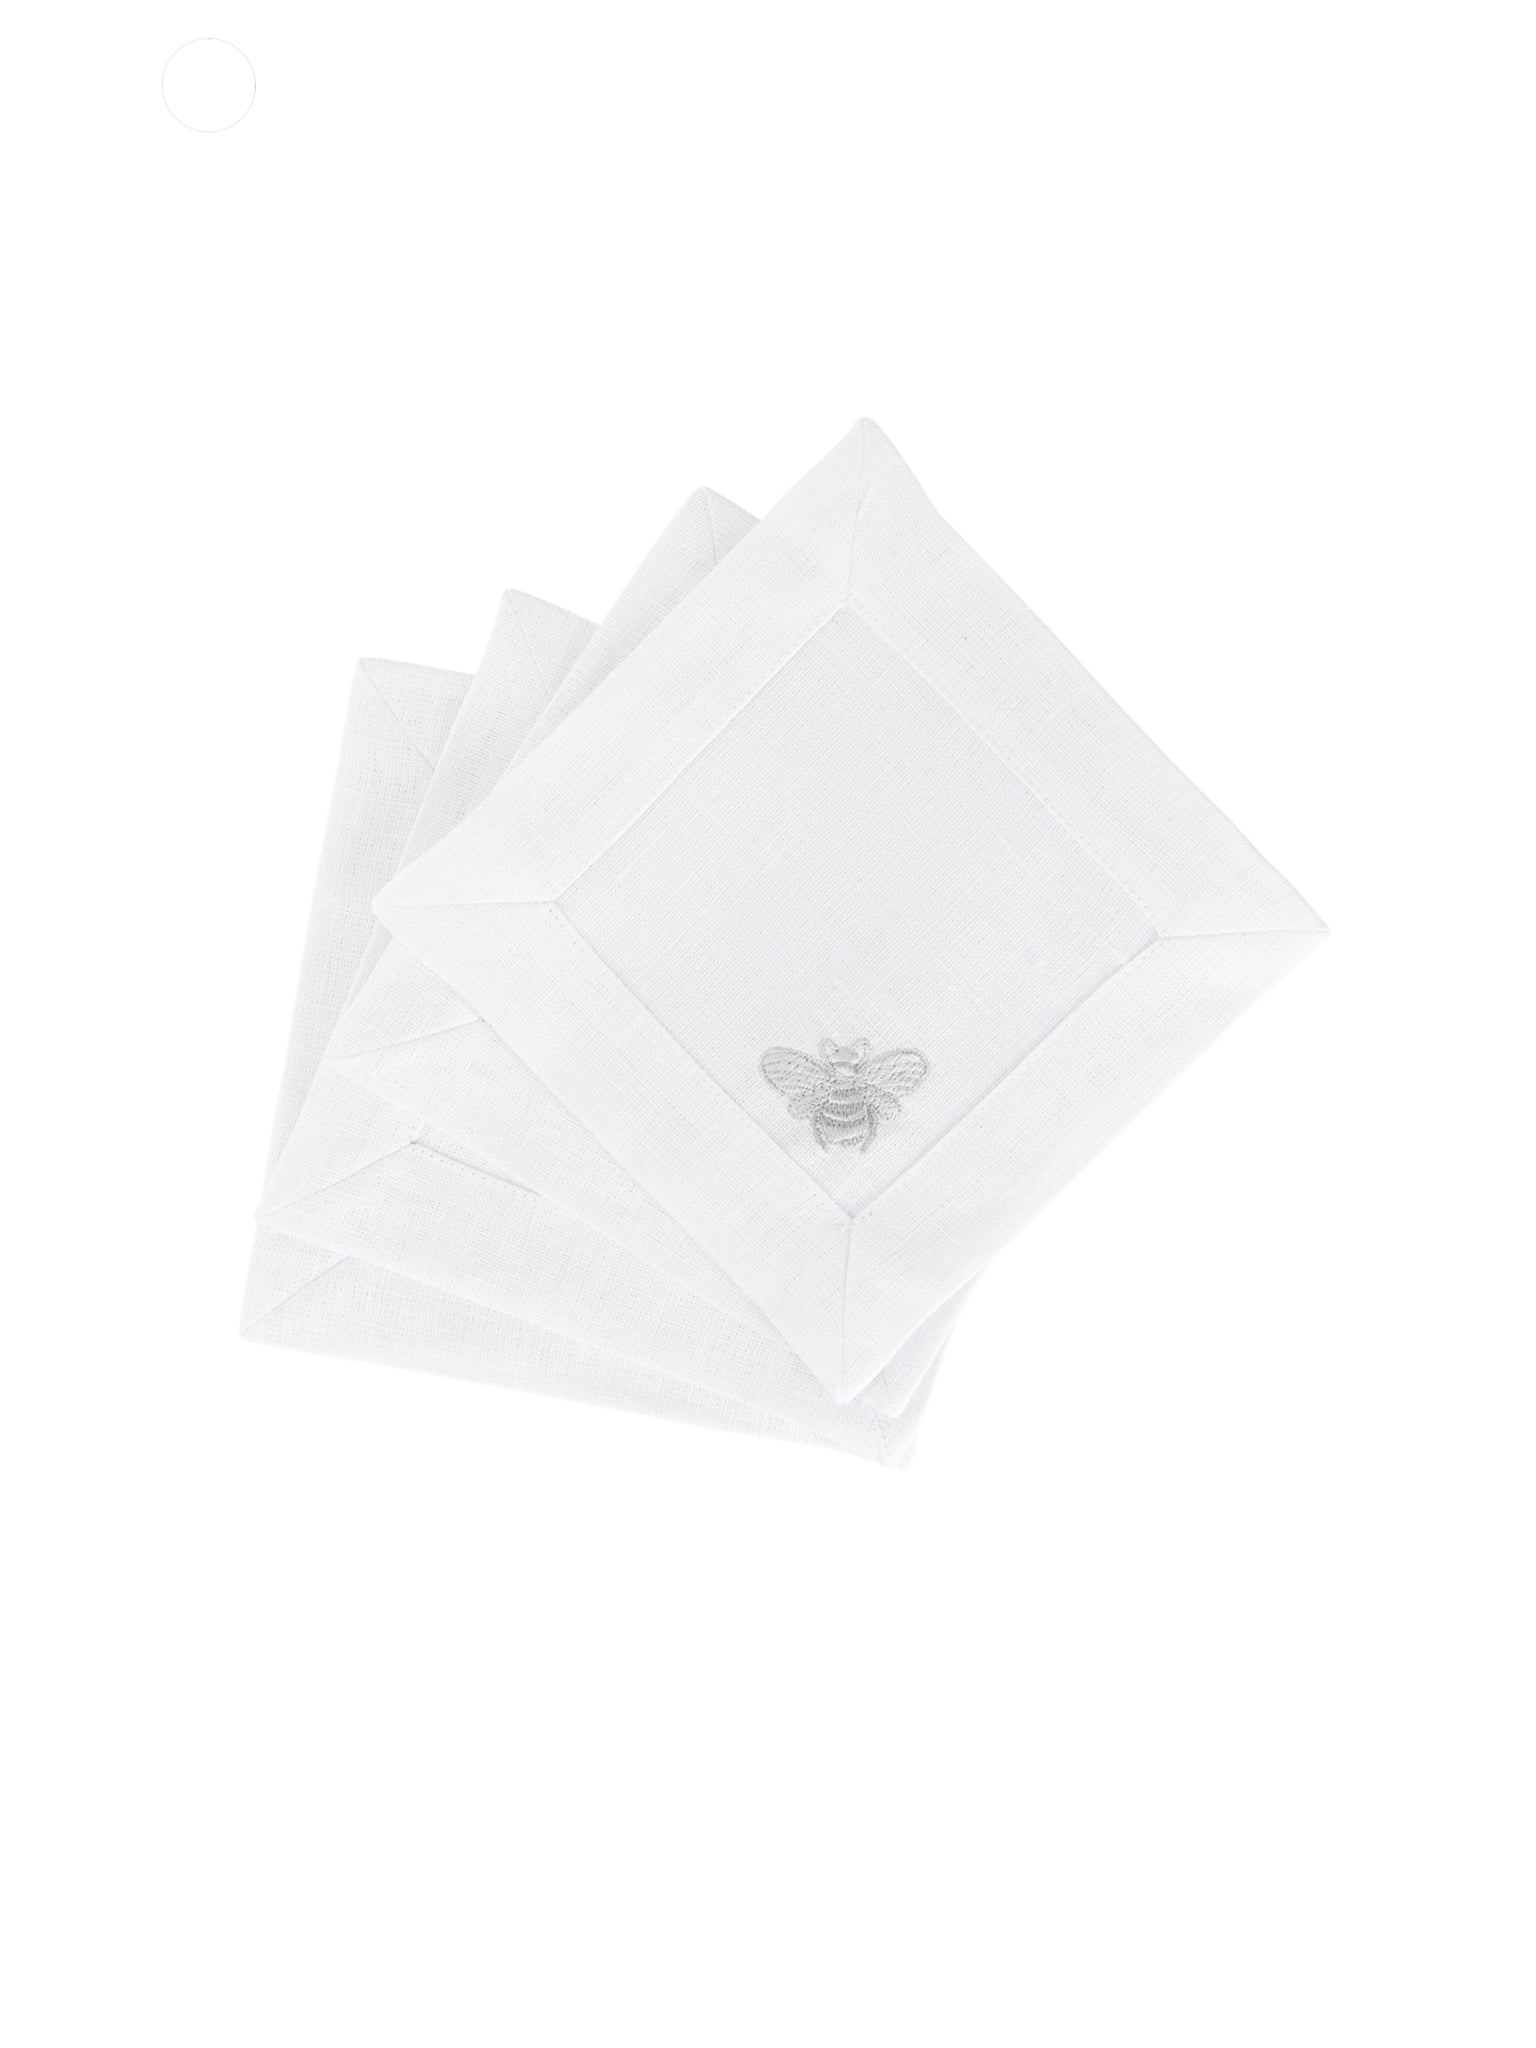 Embroidered Bee White Linen Cocktail Napkin Set